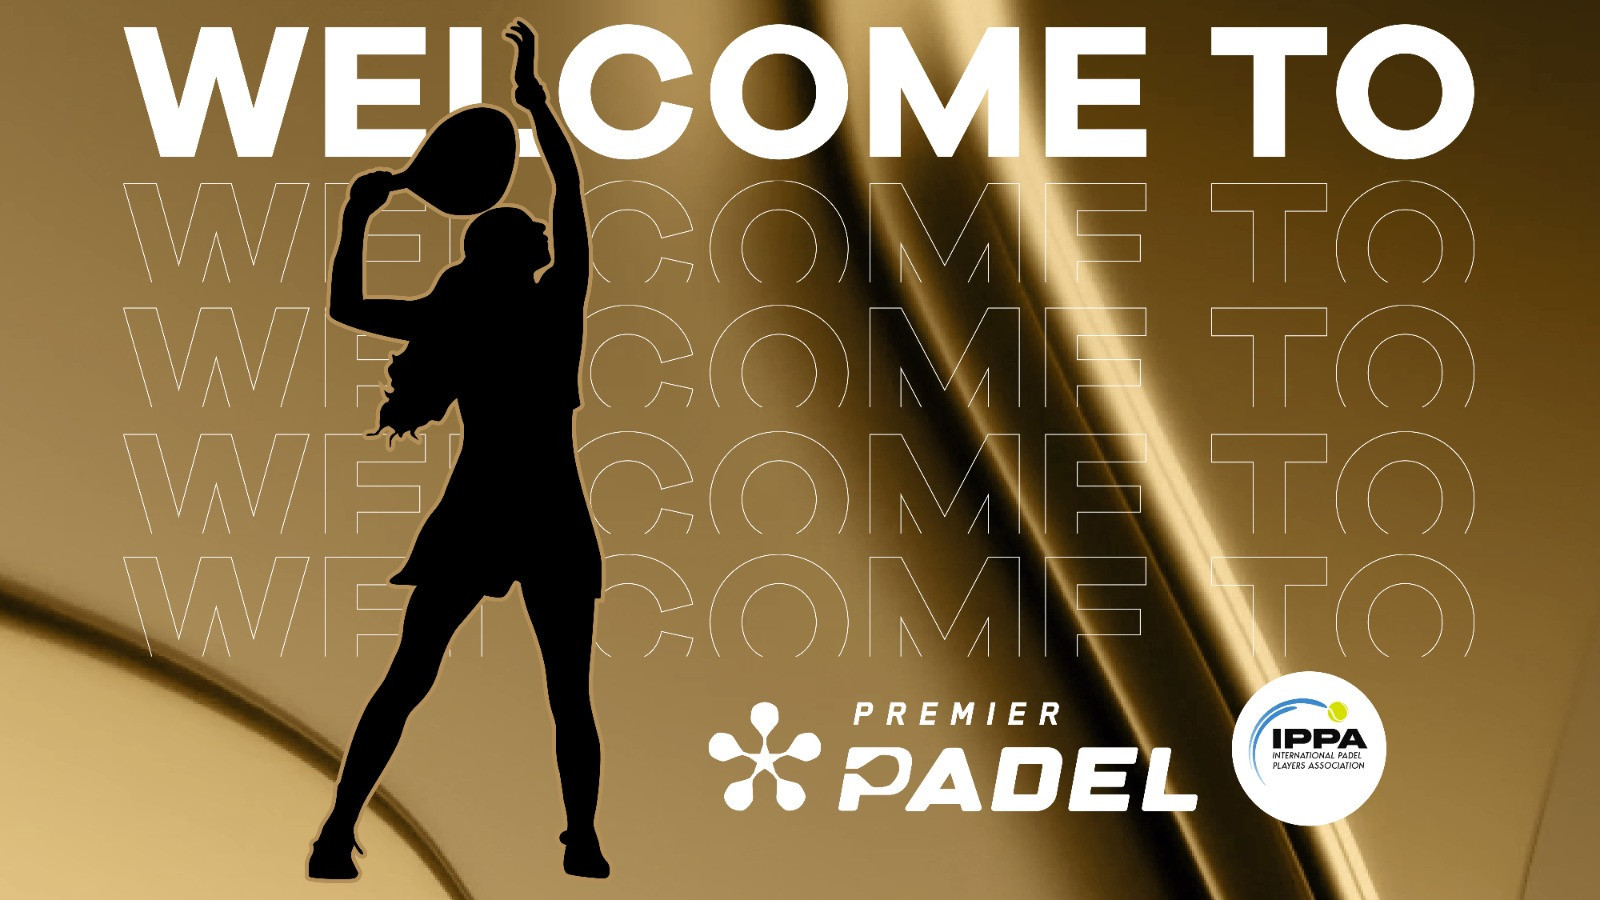 Premier Padel signs top female athletes to compete in Global Tour